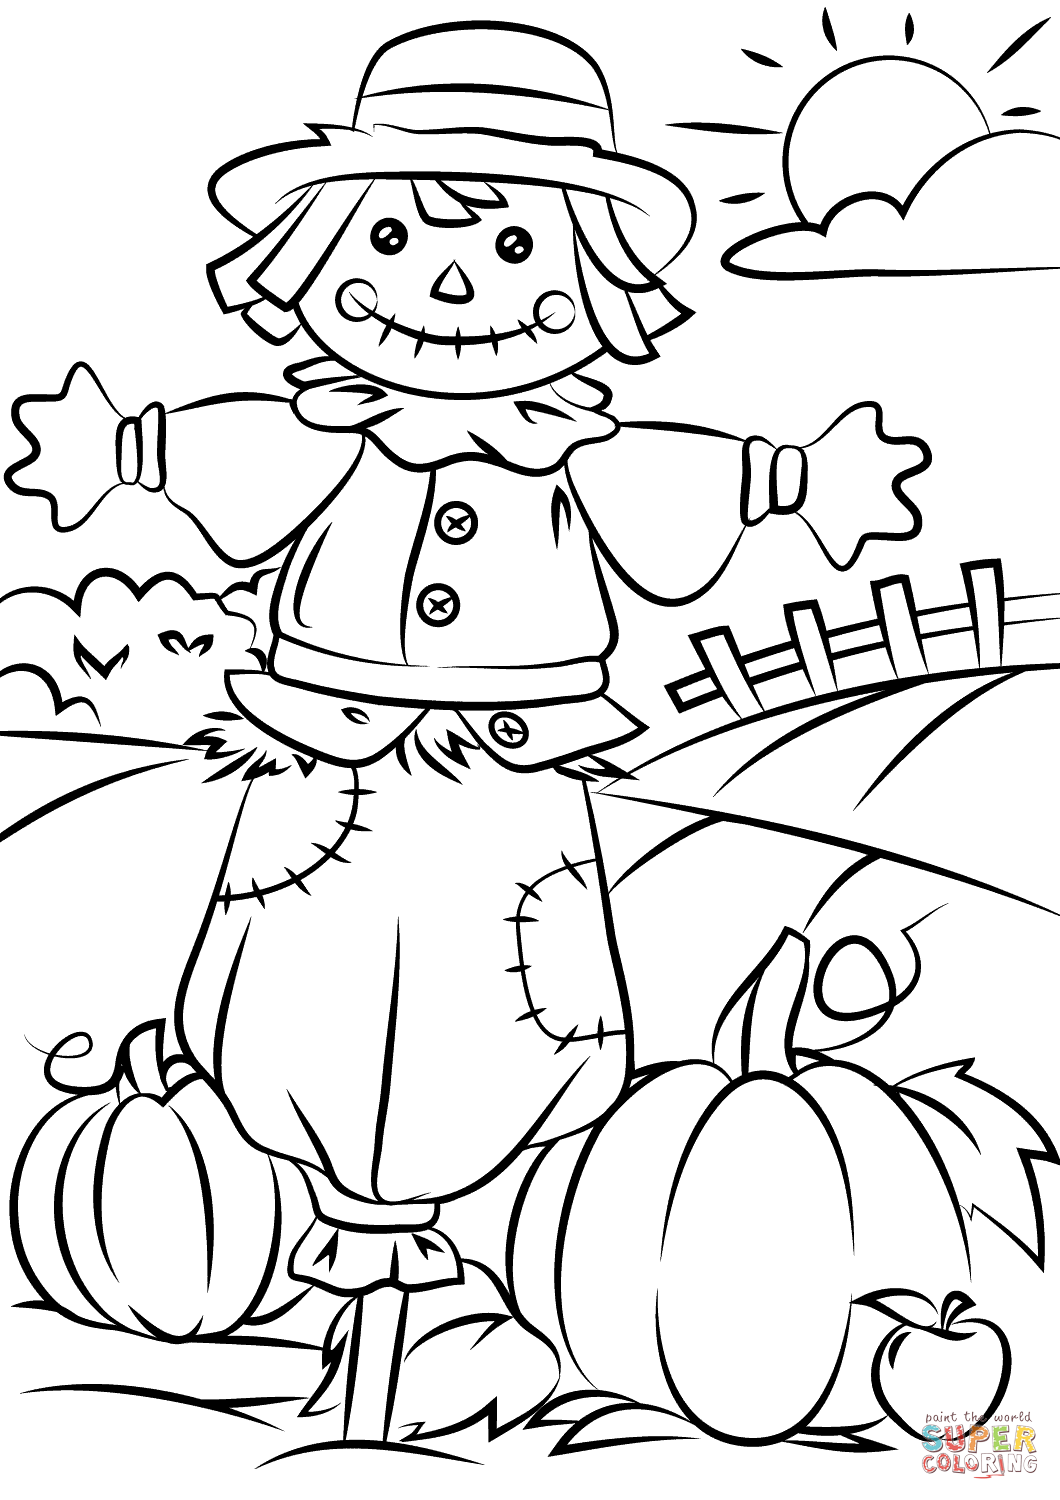 Autumn Scene with Scarecrow coloring page | Free Printable ...